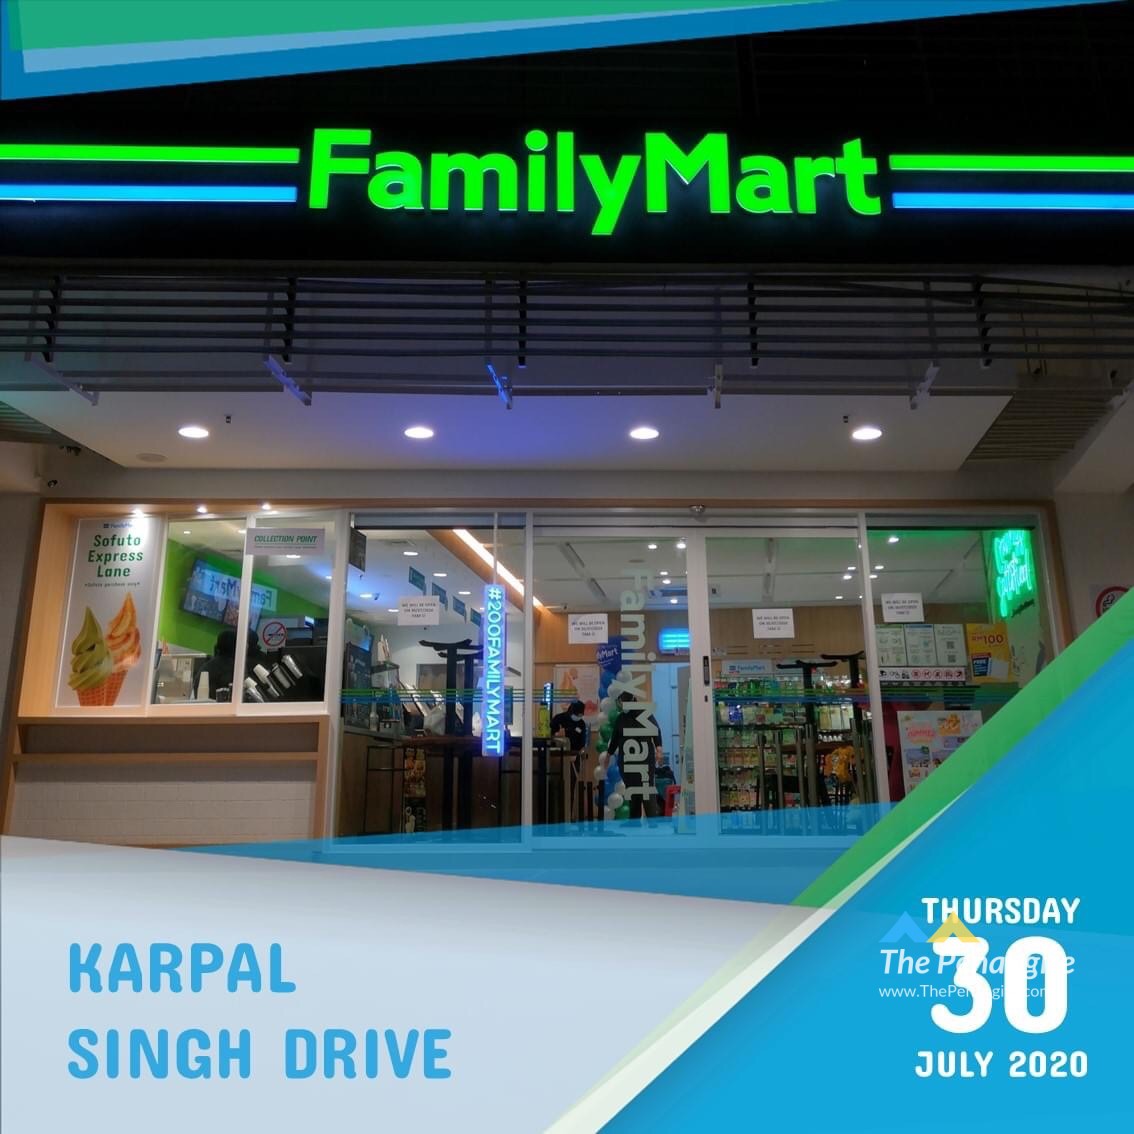 Ql Maxincome Sdn Bhd / Familymart Malaysia Rollout Confirmed Inside